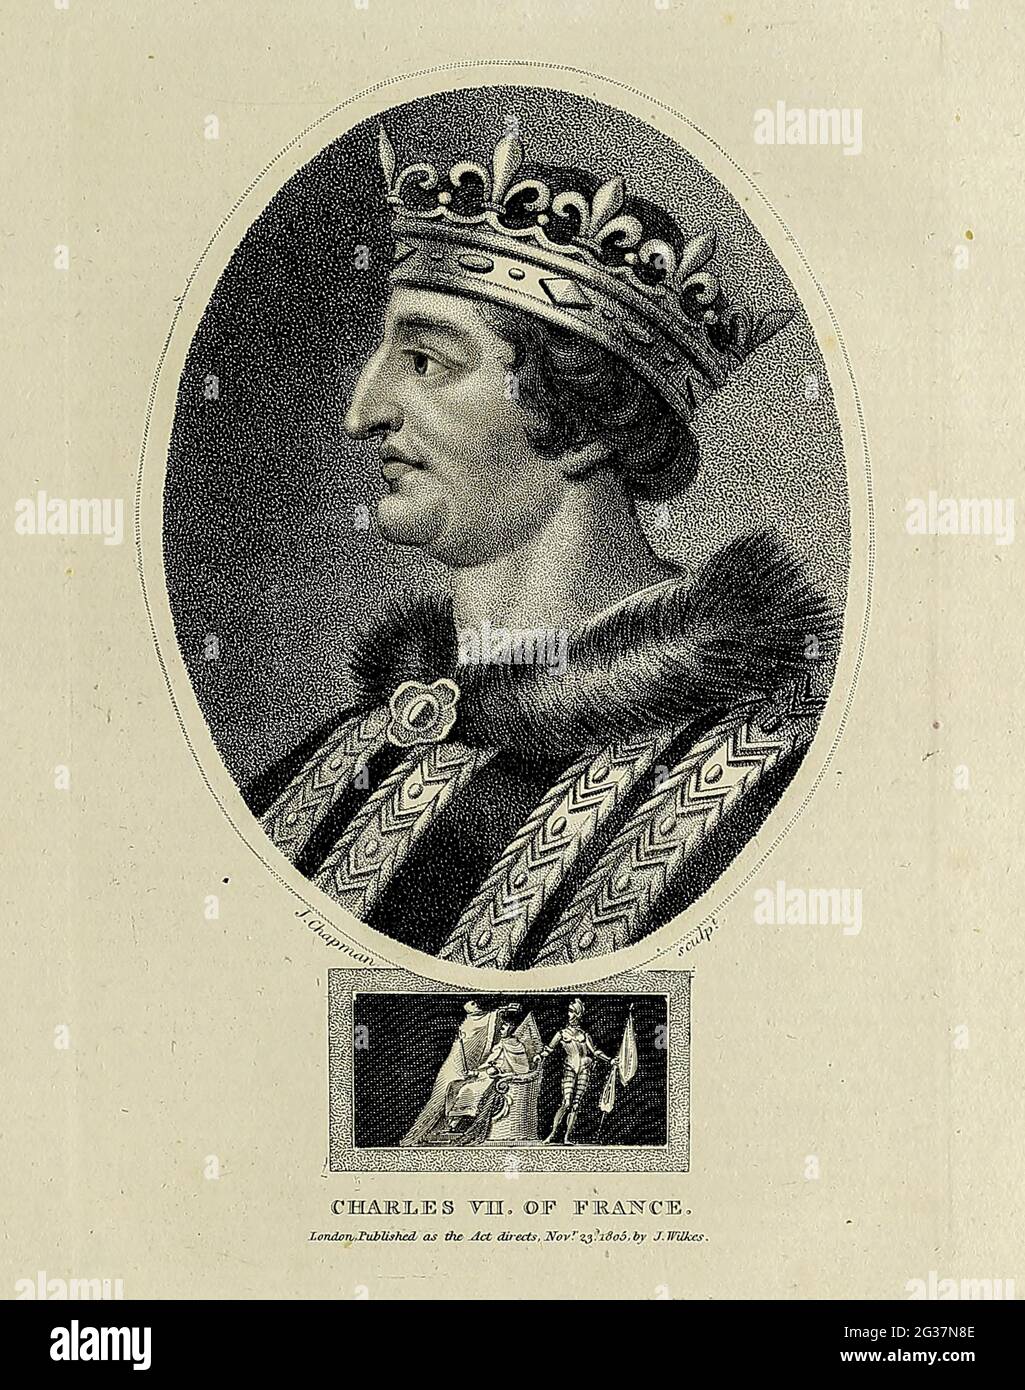 Charles VII of France (22 February 1403 – 22 July 1461), called the Victorious (French: le Victorieux) or the Well-Served (French: le Bien-Servi), was King of France from 1422 to his death in 1461. Copperplate engraving From the Encyclopaedia Londinensis or, Universal dictionary of arts, sciences, and literature; Volume VII;  Edited by Wilkes, John. Published in London in 1810 Stock Photo